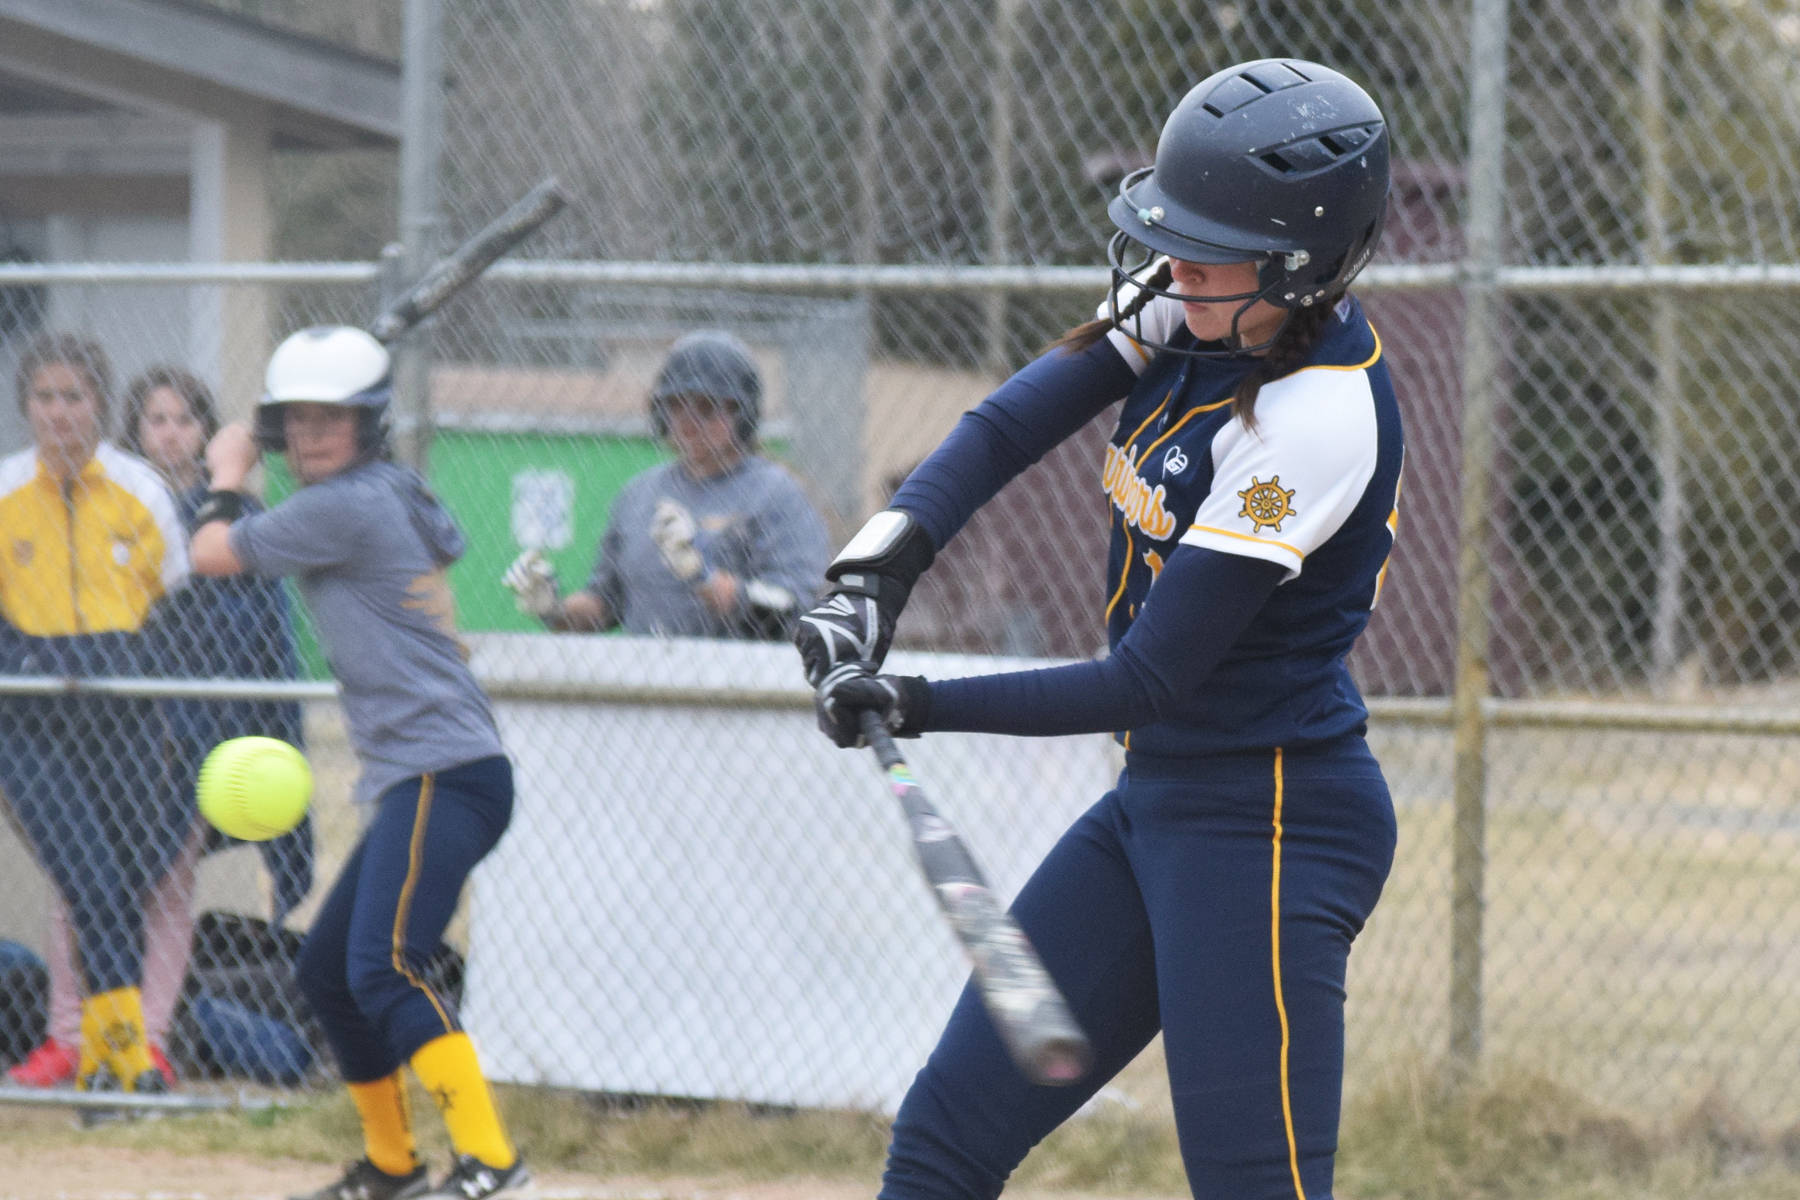 Homer’s Grace Godfrey takes a swing at a pitch in a conference game against Soldotna, Tuesday, May 7, 2019, at the Soldotna softball fields. (Photo by Joey Klecka/Peninsula Clarion)